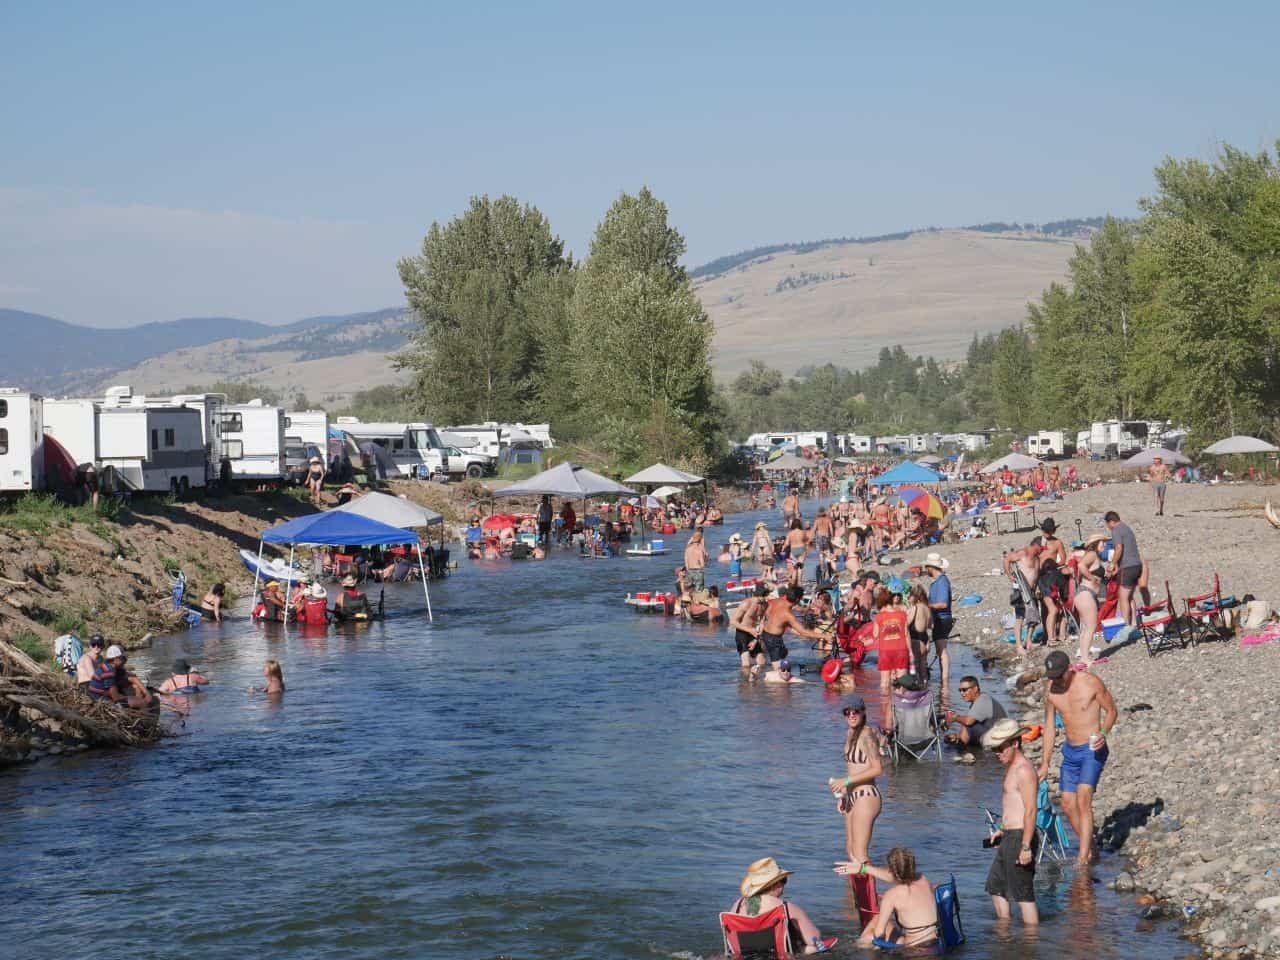 Festival goers celebrate country music in the sunshine in Merritt BC's most famous river.